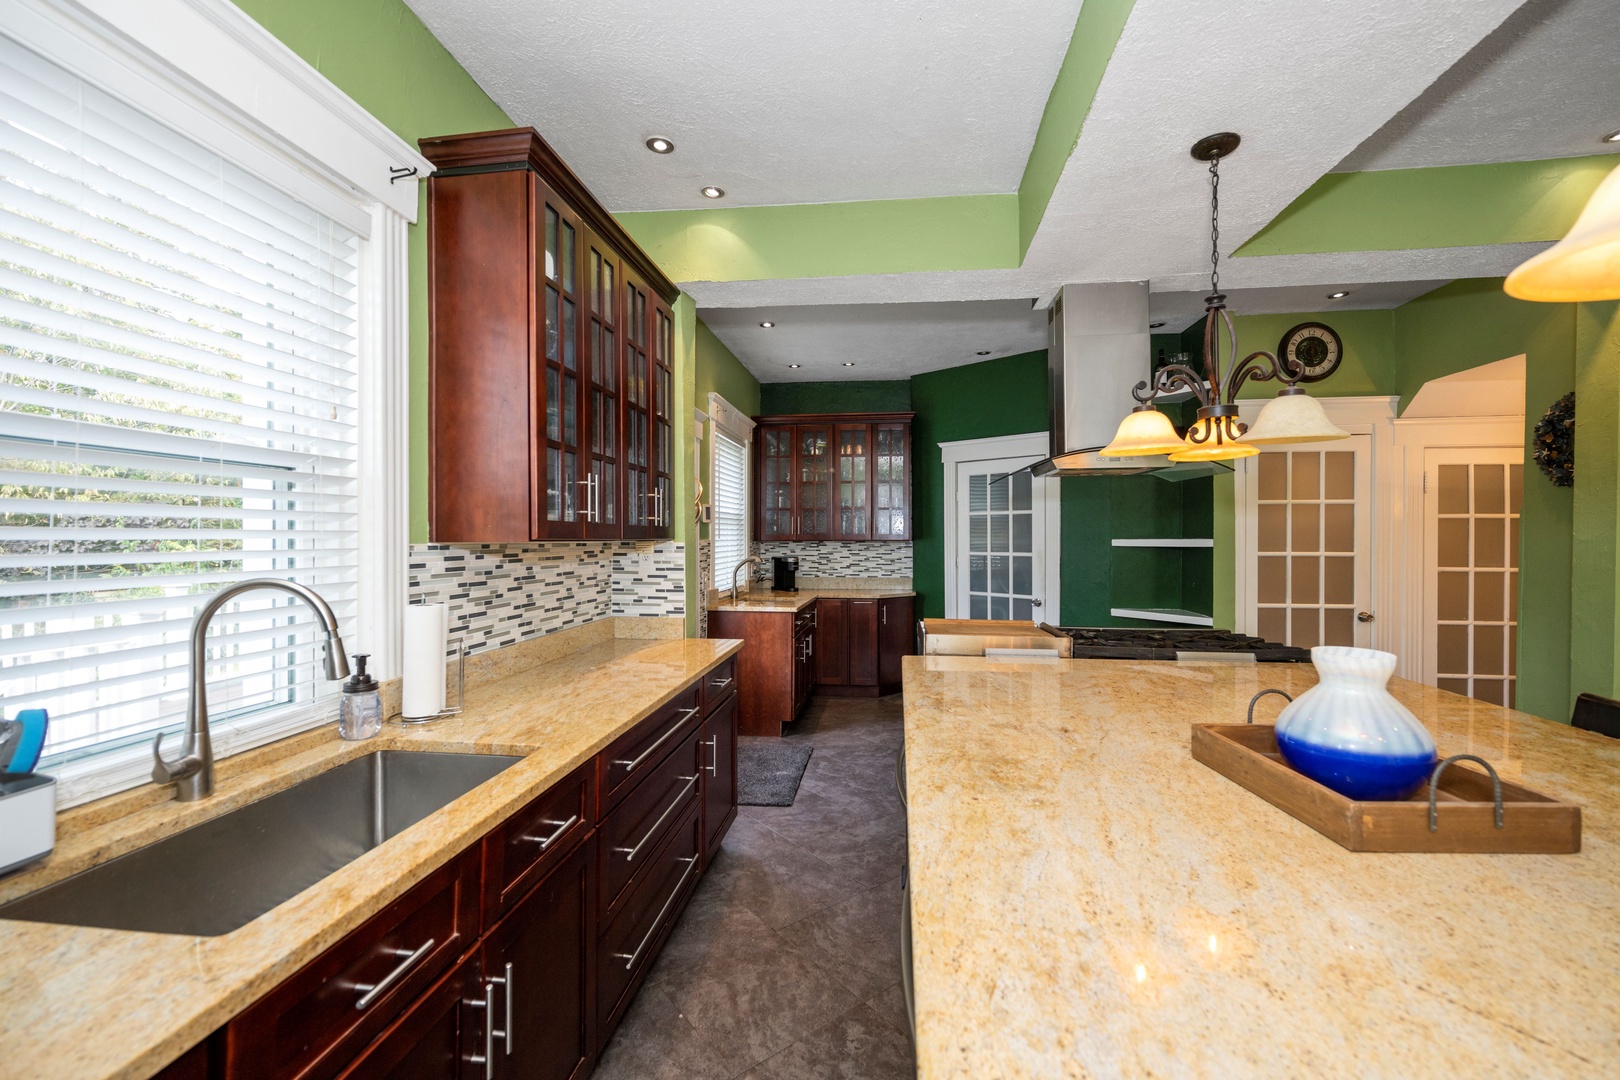 The kitchen is a chef’s dream, with loads of space & high-end amenities